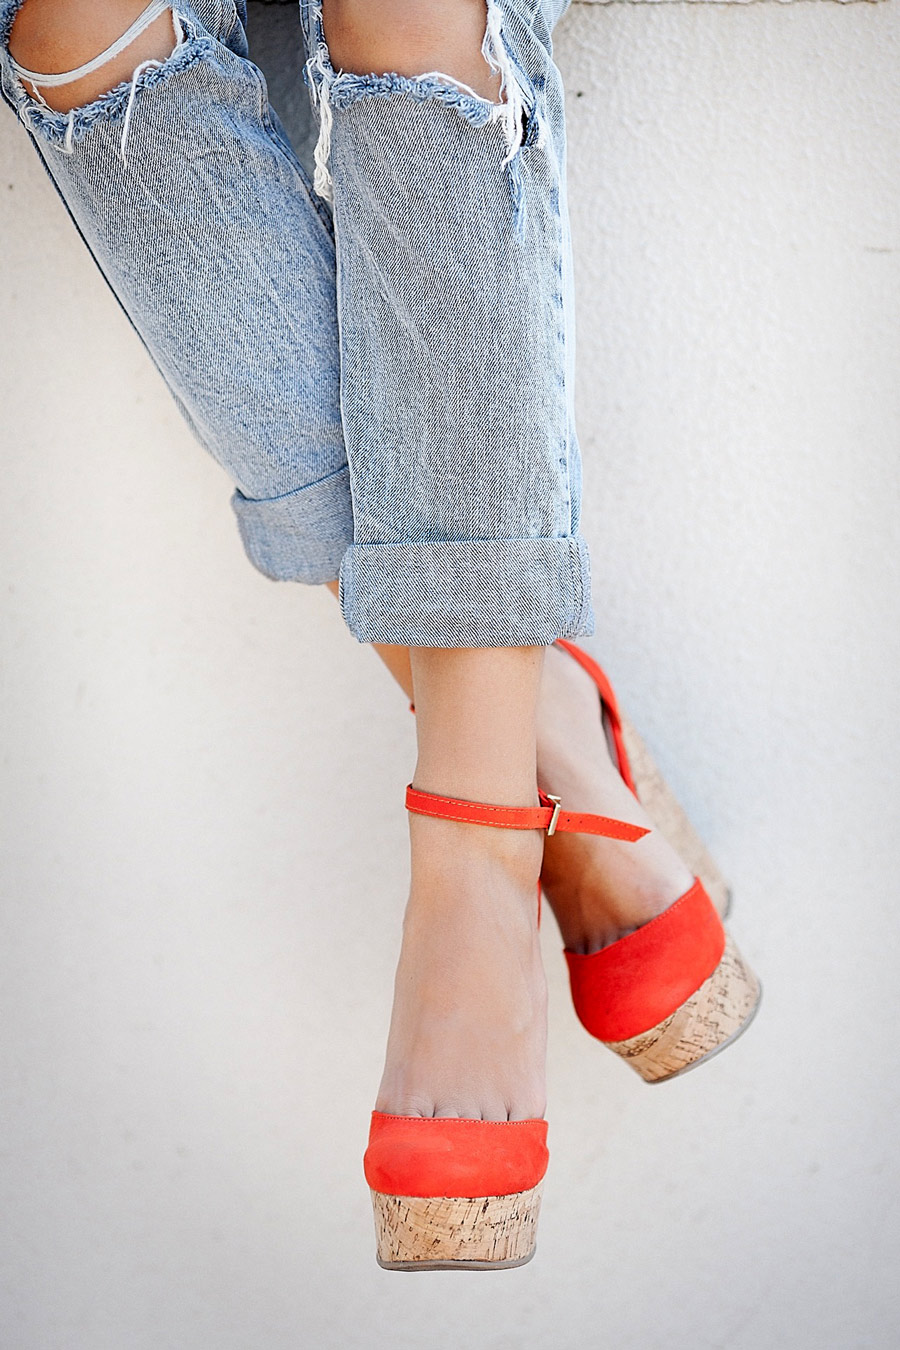 asos wedged sandals for summer